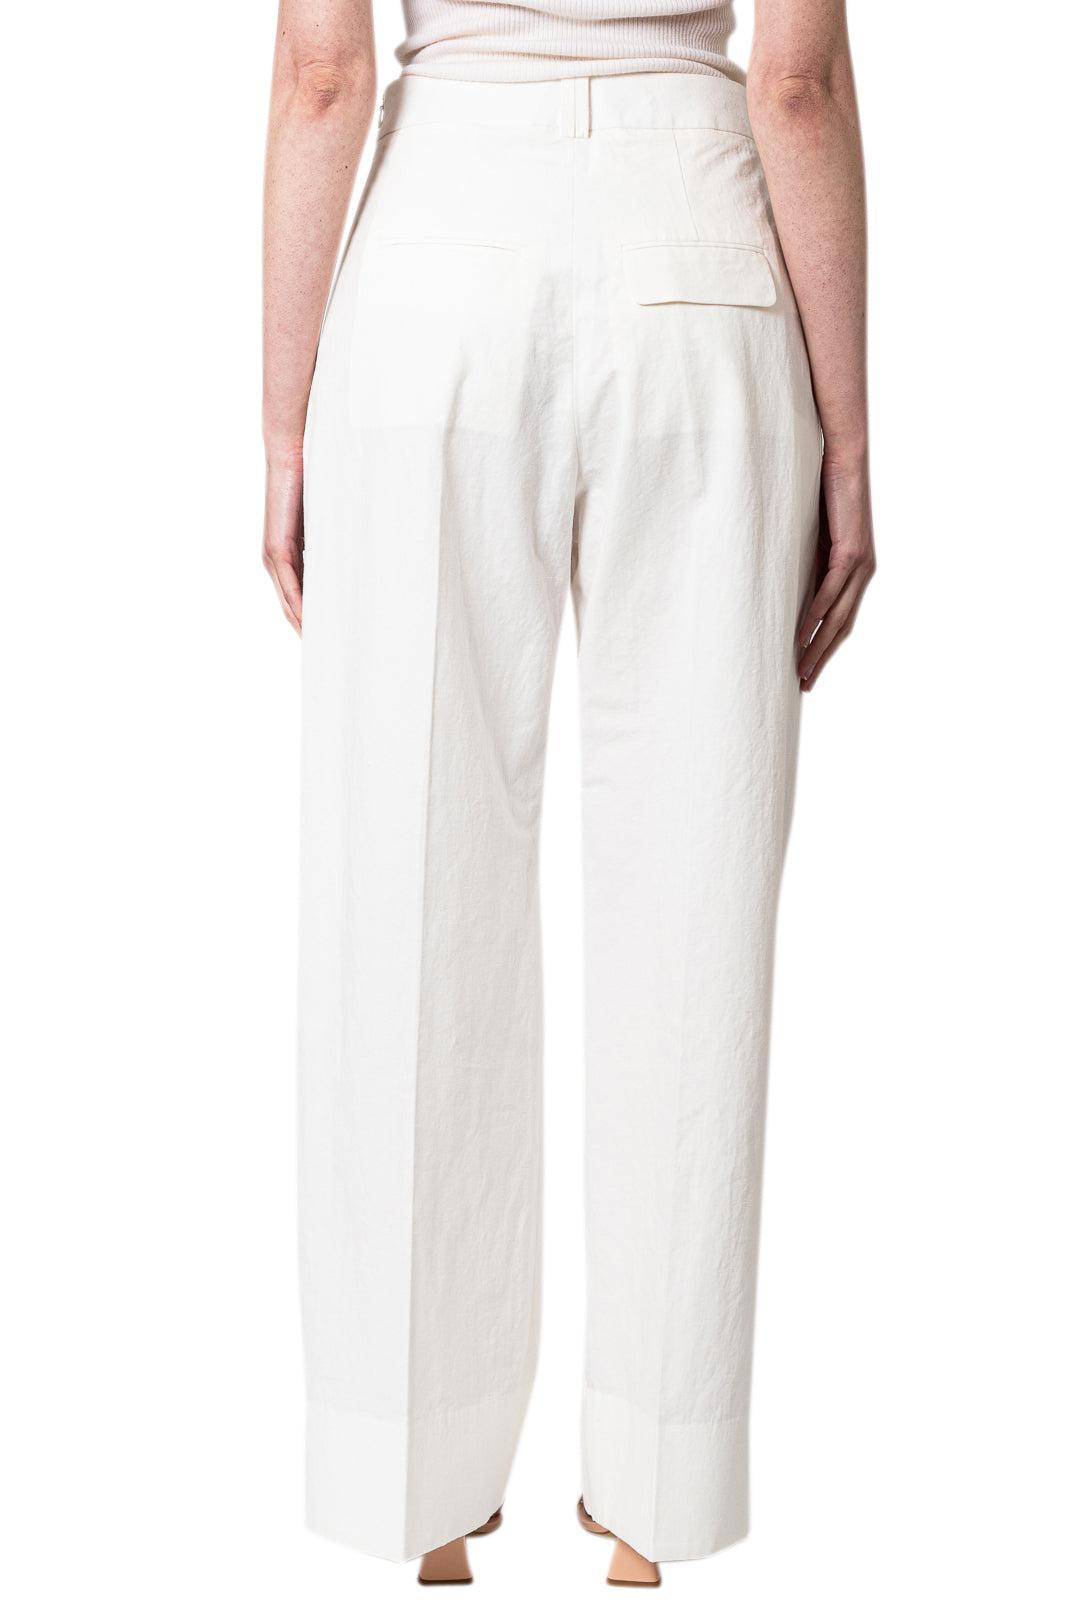 Gia Studios-Highwaisted Trousers-TR015-FC0510-38-dgallerystore